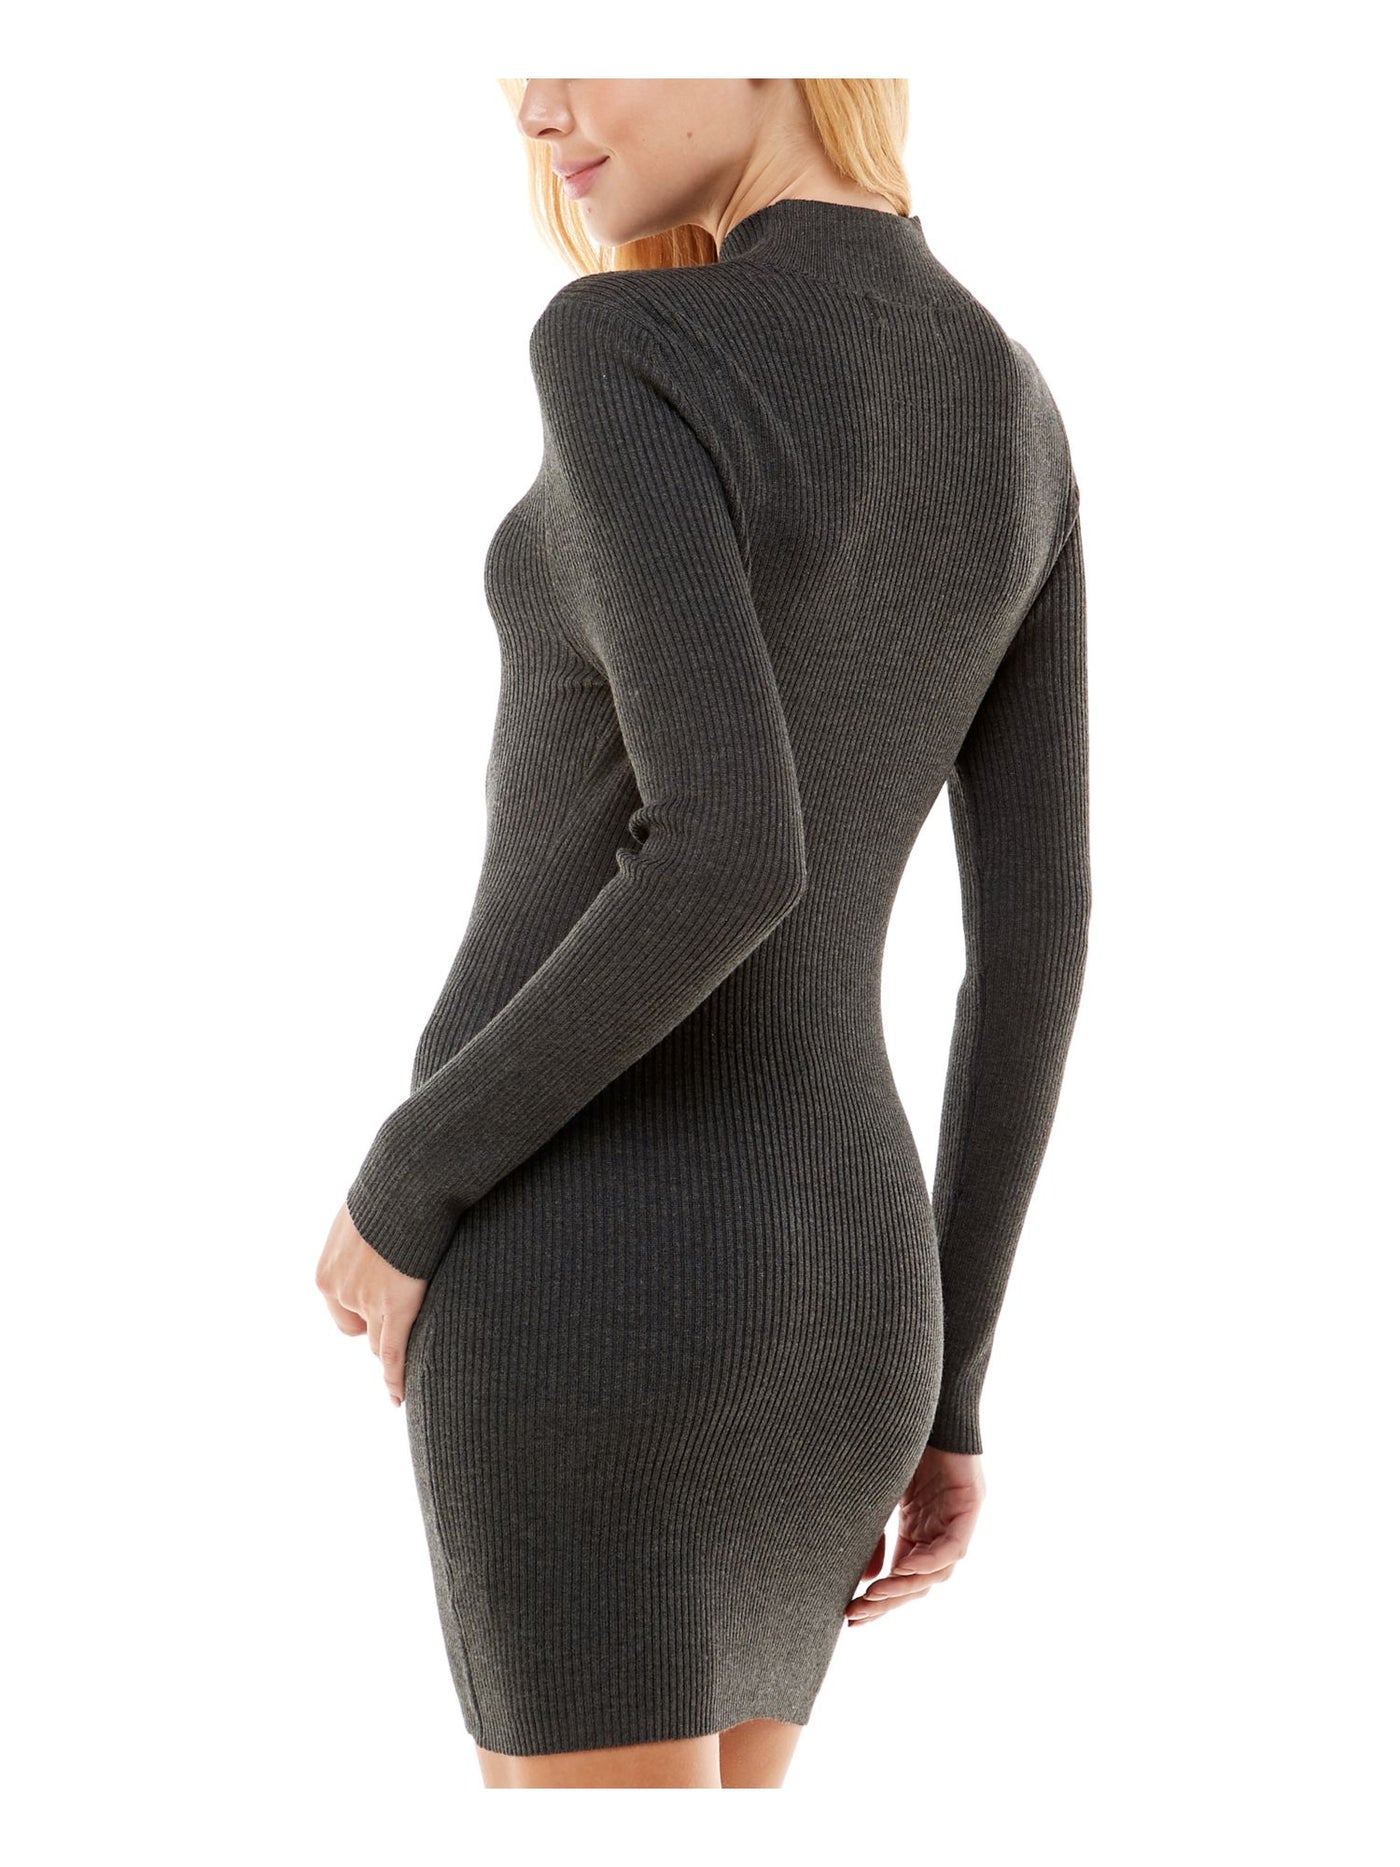 NO COMMENT Womens Ribbed Cut Out Long Sleeve Mock Neck Short Party Sweater Dress